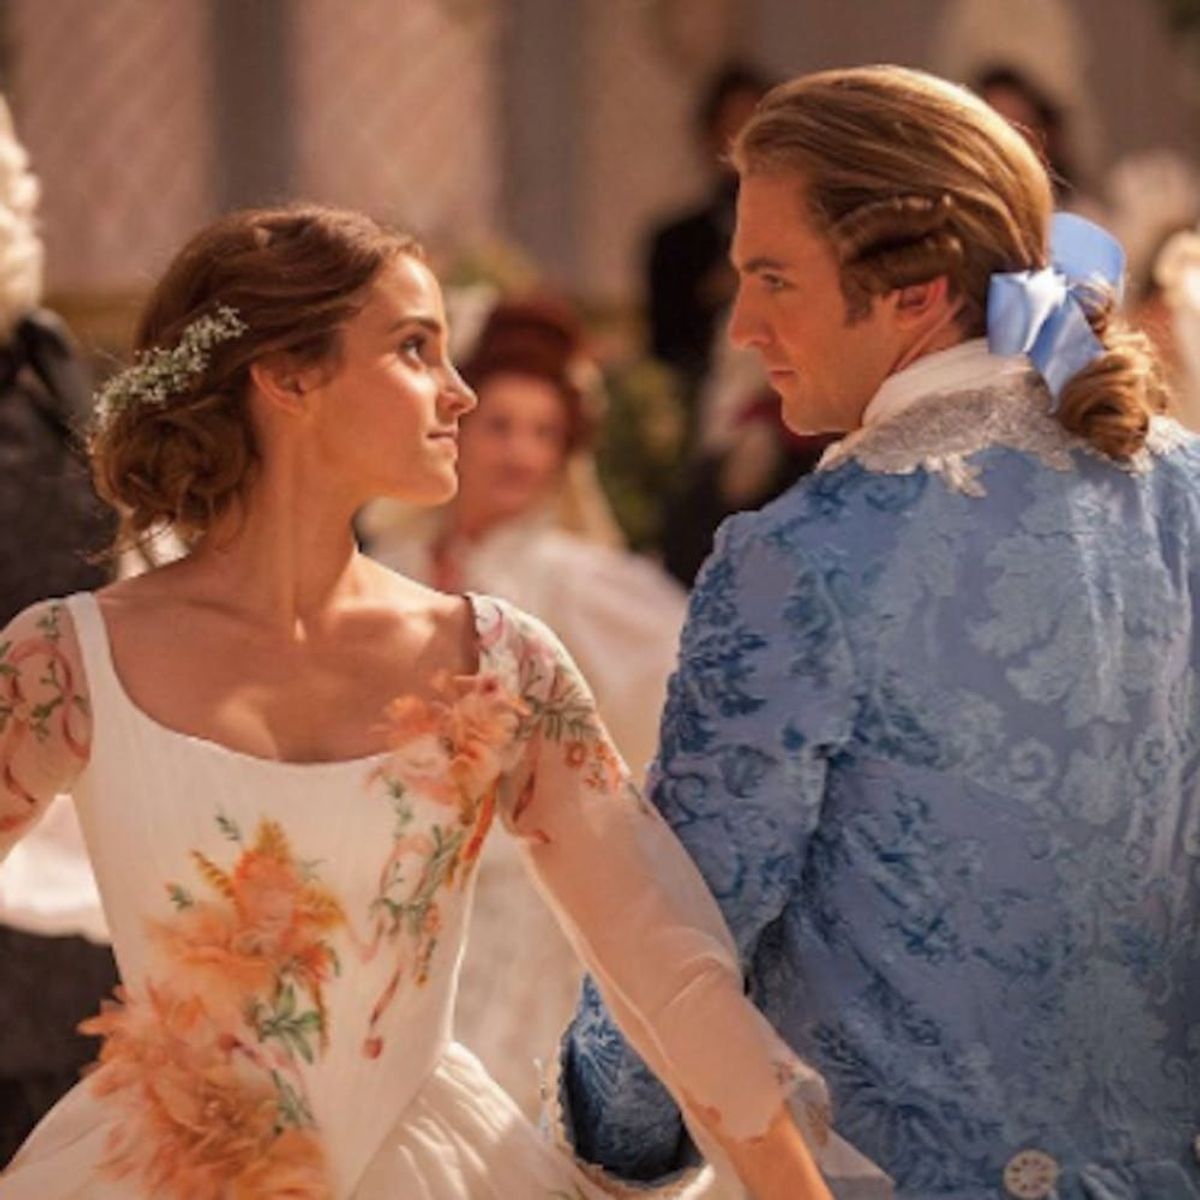 ‘Beauty and the Beast’ Gets a New Trailer in Time for the Oscars and Golden Globes